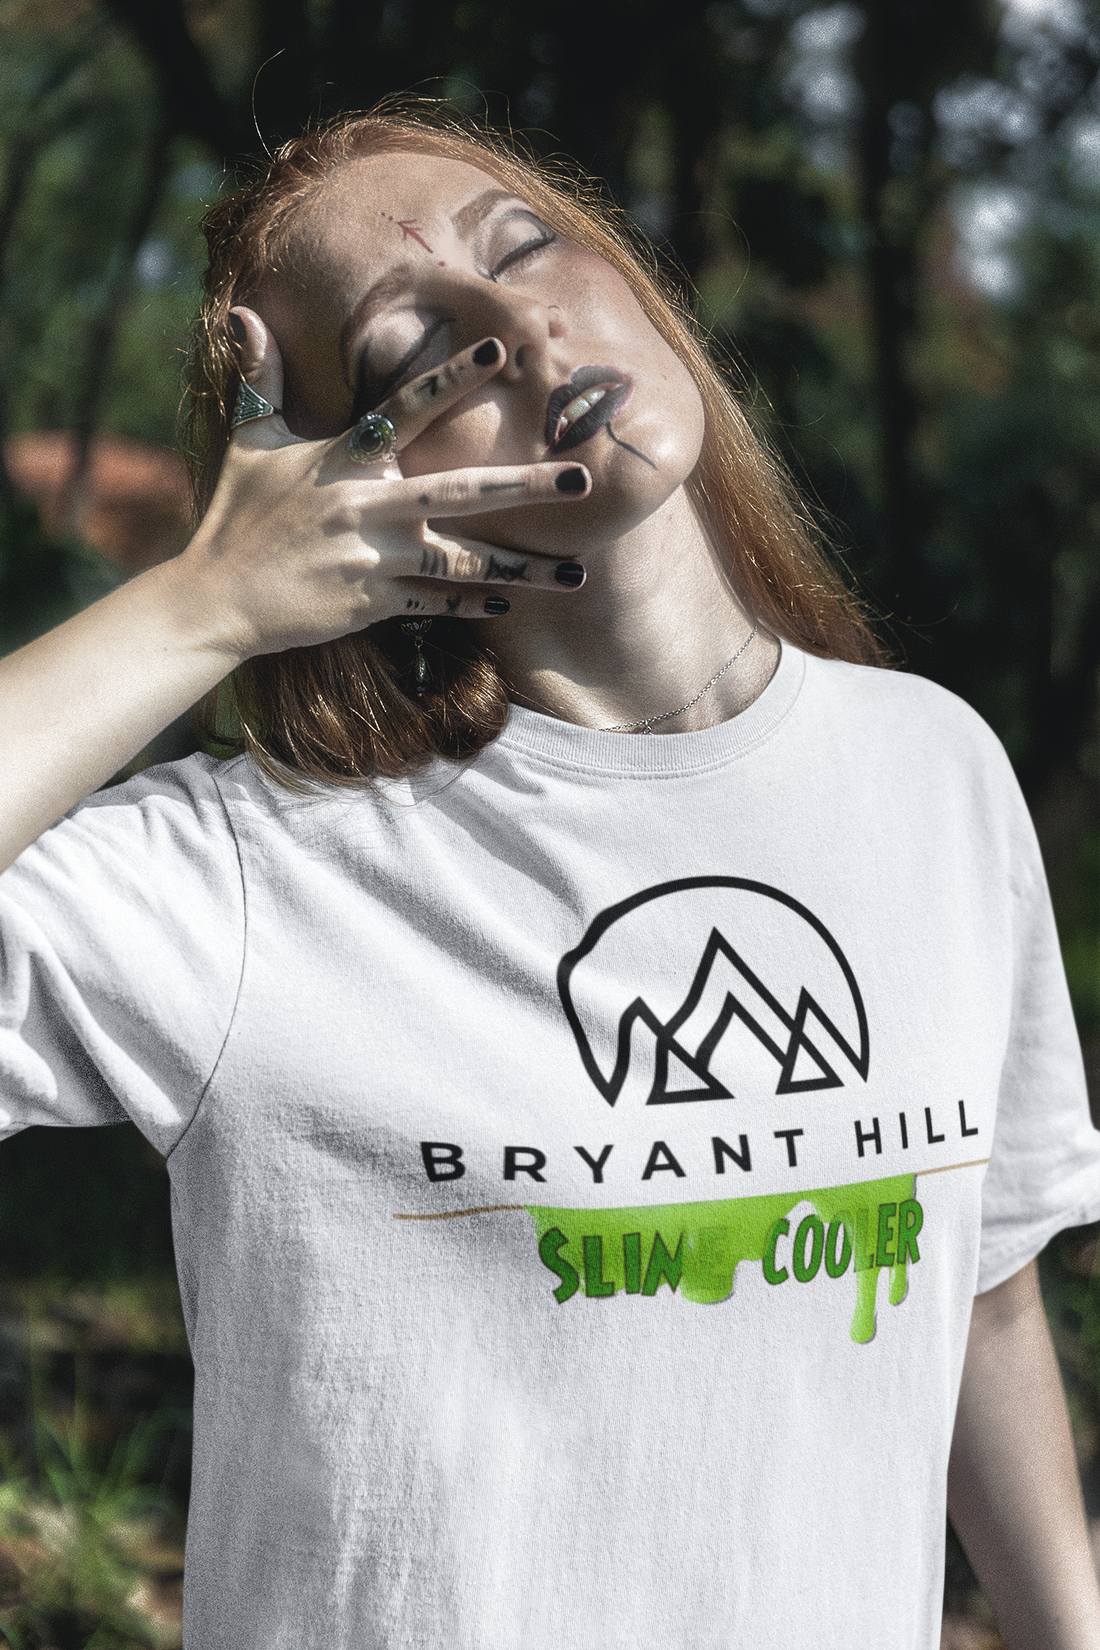 BRYANT-HILL-SLIME-COOLER-GHOSTBUSTERS-ECTO-COOLER-SHIRT